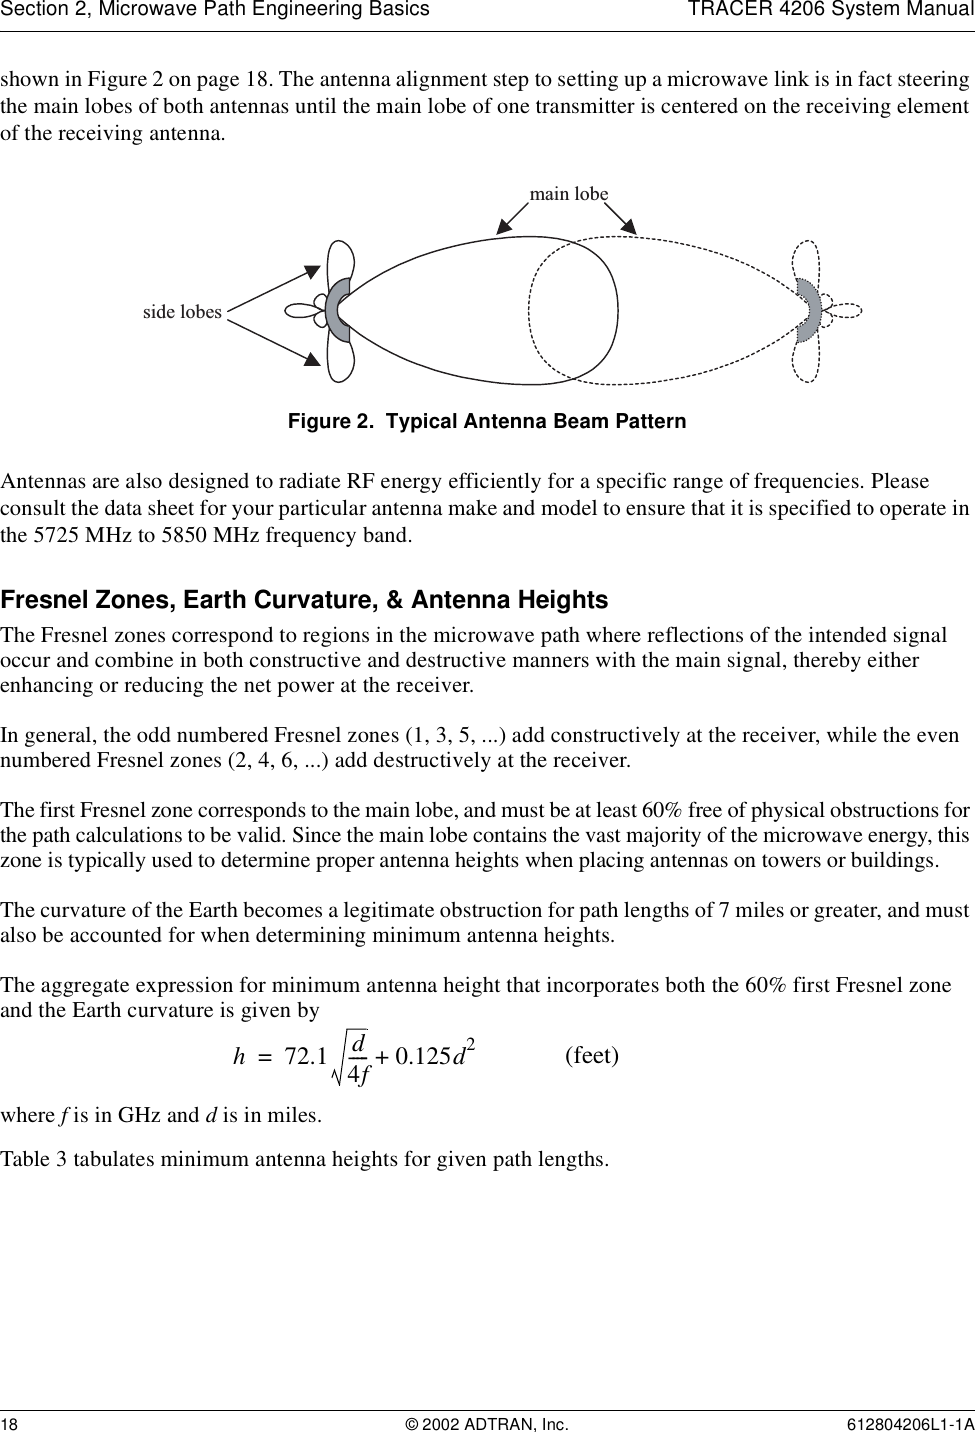 Section 2, Microwave Path Engineering Basics TRACER 4206 System Manual18 © 2002 ADTRAN, Inc. 612804206L1-1Ashown in Figure 2 on page 18. The antenna alignment step to setting up a microwave link is in fact steering the main lobes of both antennas until the main lobe of one transmitter is centered on the receiving element of the receiving antenna.Figure 2.  Typical Antenna Beam PatternAntennas are also designed to radiate RF energy efficiently for a specific range of frequencies. Please consult the data sheet for your particular antenna make and model to ensure that it is specified to operate in the 5725 MHz to 5850 MHz frequency band.Fresnel Zones, Earth Curvature, &amp; Antenna HeightsThe Fresnel zones correspond to regions in the microwave path where reflections of the intended signal occur and combine in both constructive and destructive manners with the main signal, thereby either enhancing or reducing the net power at the receiver.In general, the odd numbered Fresnel zones (1, 3, 5, ...) add constructively at the receiver, while the even numbered Fresnel zones (2, 4, 6, ...) add destructively at the receiver.The first Fresnel zone corresponds to the main lobe, and must be at least 60% free of physical obstructions for the path calculations to be valid. Since the main lobe contains the vast majority of the microwave energy, this zone is typically used to determine proper antenna heights when placing antennas on towers or buildings.The curvature of the Earth becomes a legitimate obstruction for path lengths of 7 miles or greater, and must also be accounted for when determining minimum antenna heights.The aggregate expression for minimum antenna height that incorporates both the 60% first Fresnel zone and the Earth curvature is given bywhere f is in GHz and d is in miles.Table 3 tabulates minimum antenna heights for given path lengths.main lobeside lobesh72.1 d4f----- 0.125d2+= (feet)